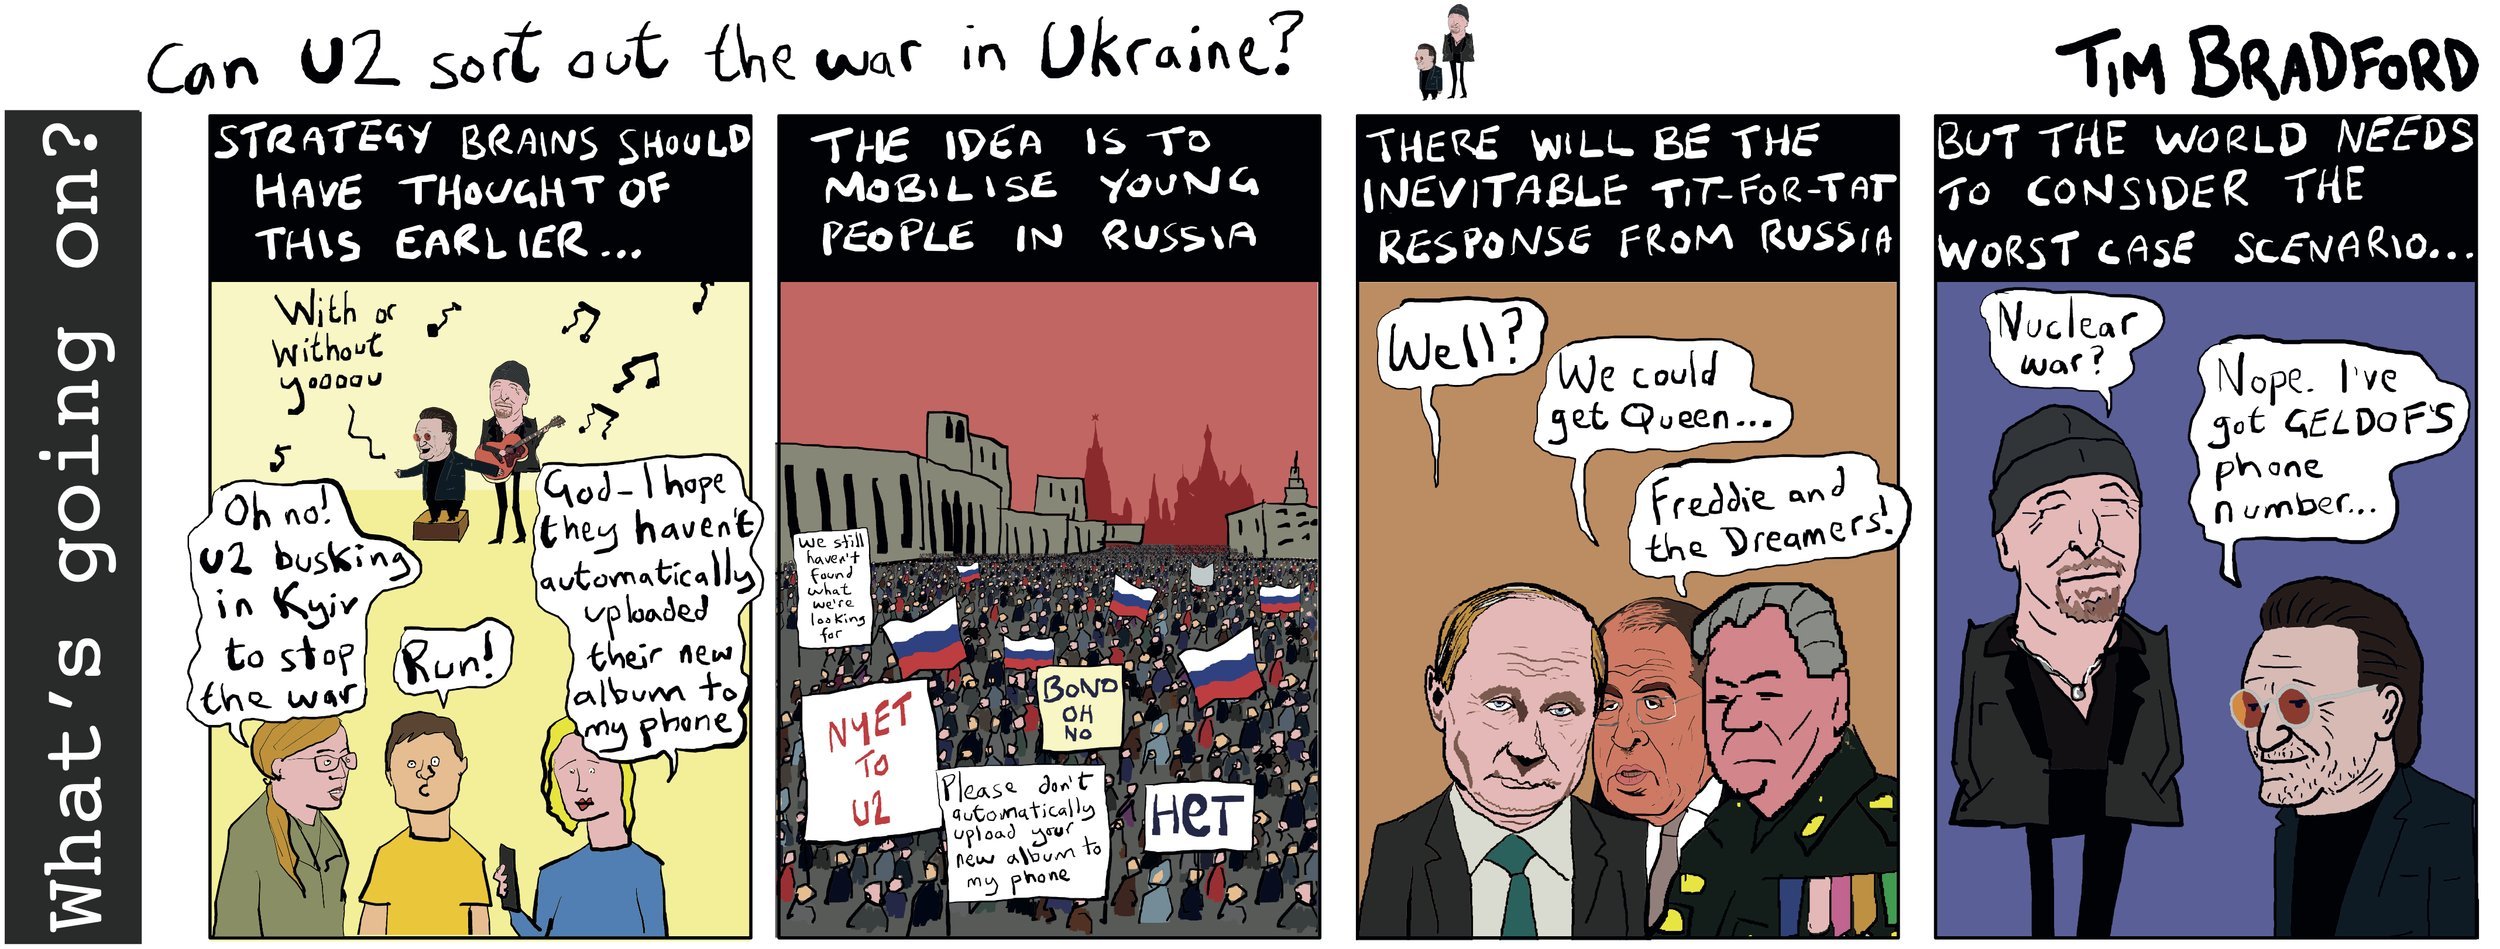 Can U2 sort out the war in Ukraine? - 09/05/2022